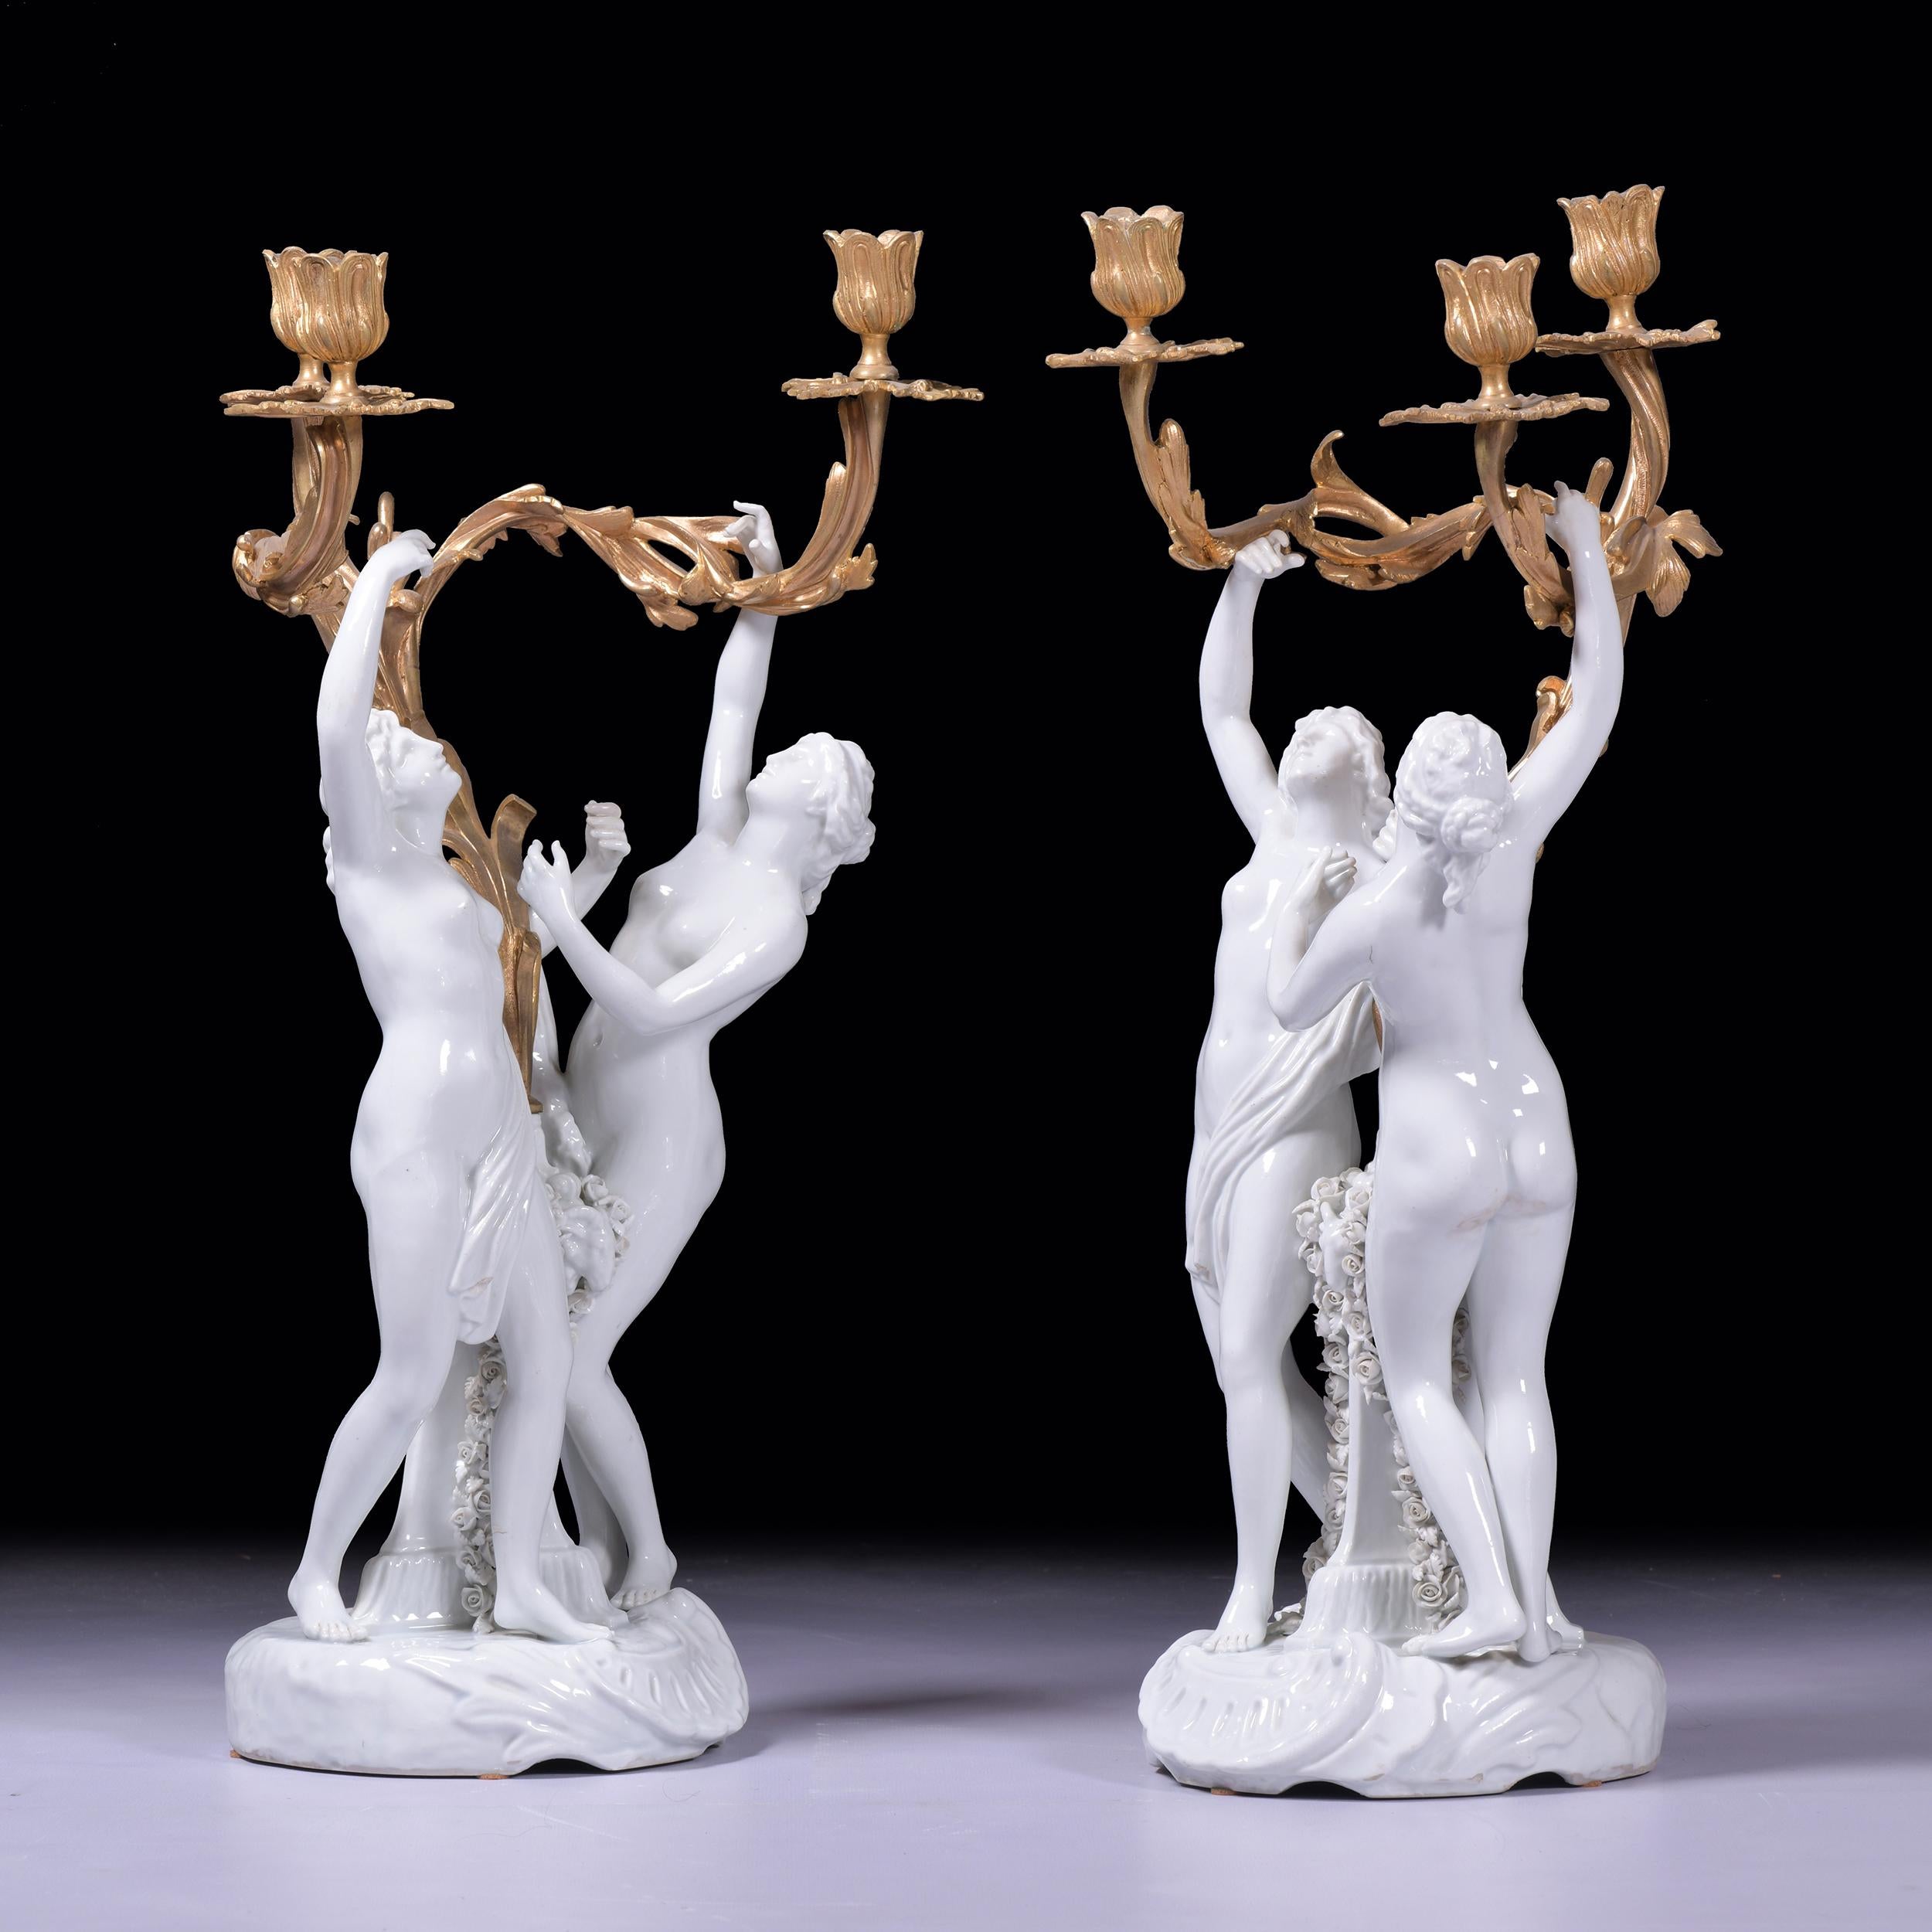 Neoclassical Revival 19th Century Pair Of Capodimonte Porcelain & Ormolu Candelabra For Sale